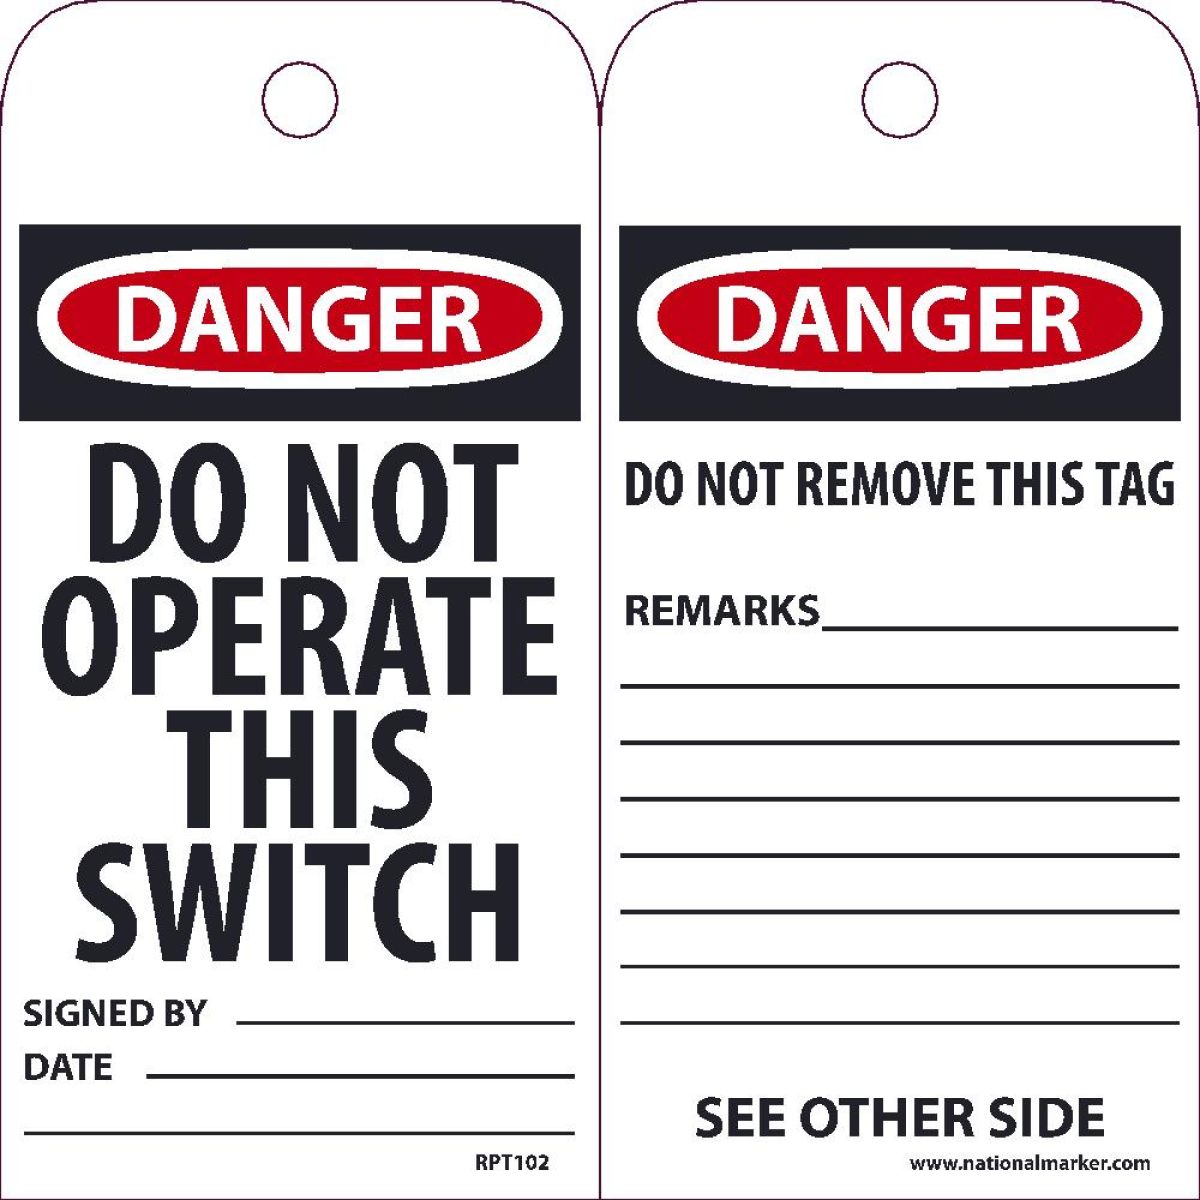 DO NOT OPERATE THIS SWITCH TAG